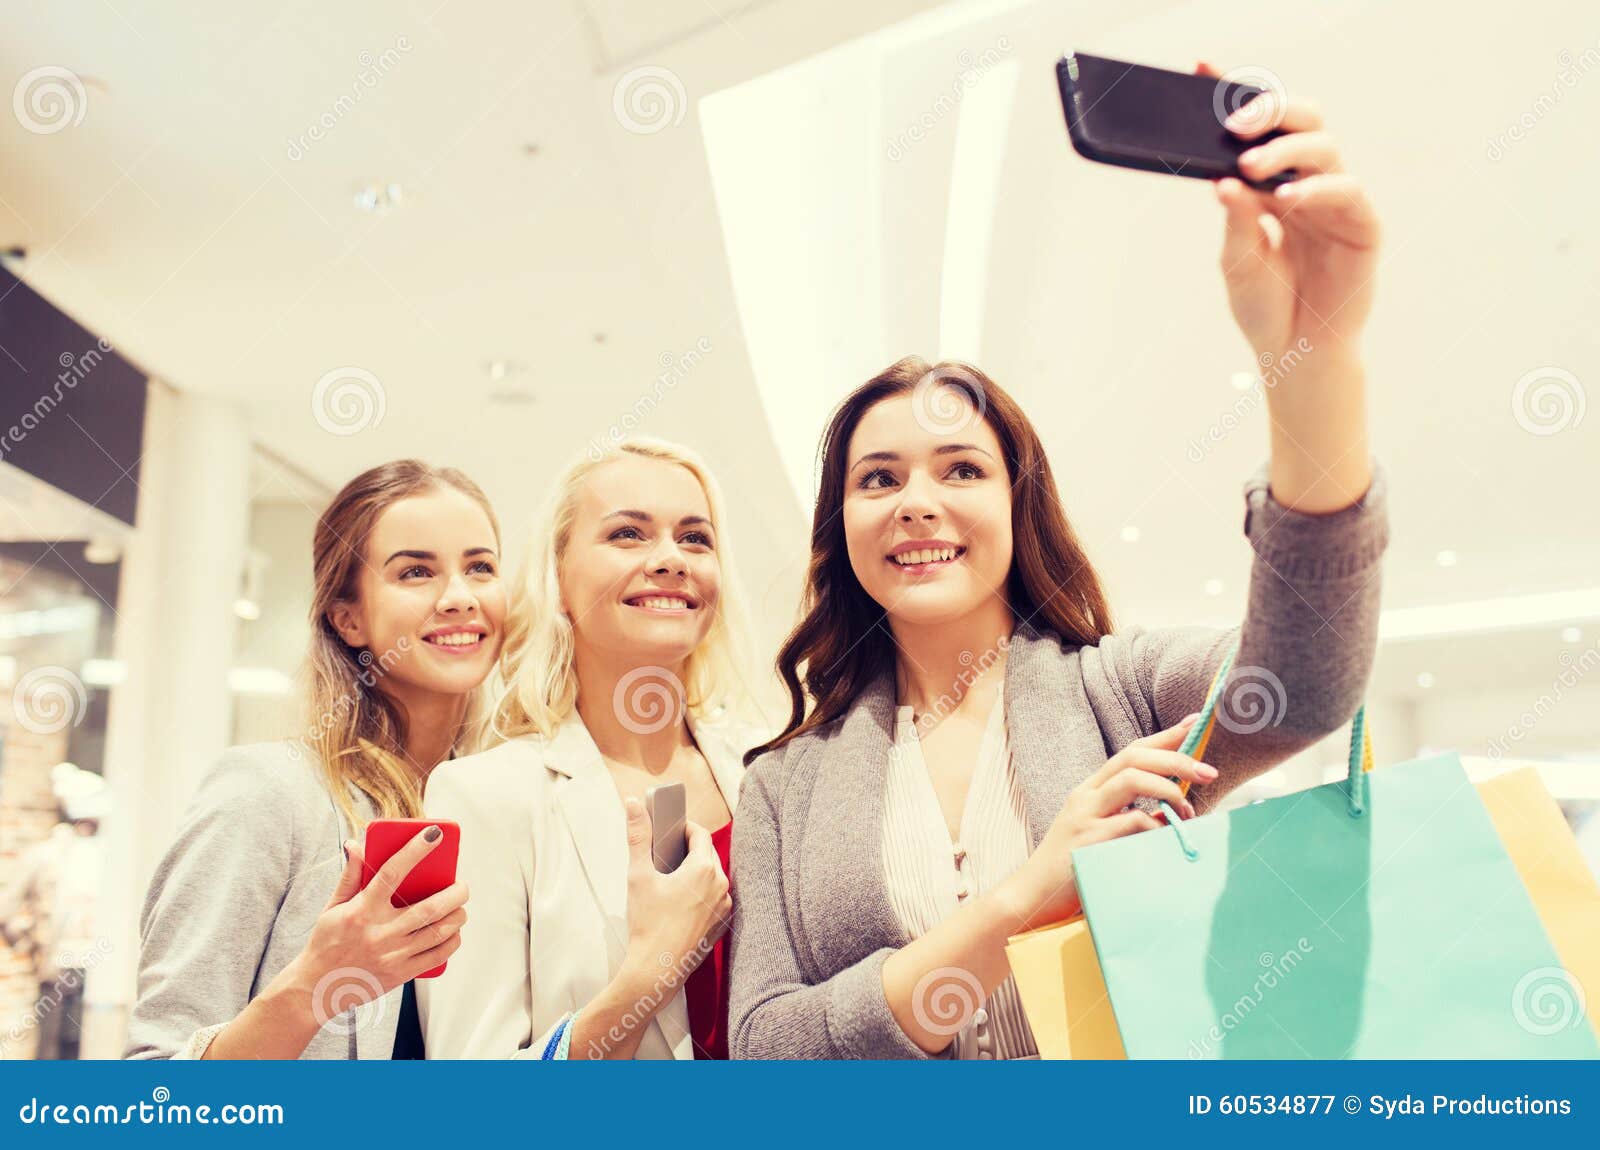 Women with Smartphones Shopping and Taking Selfie Stock Image - Image ...